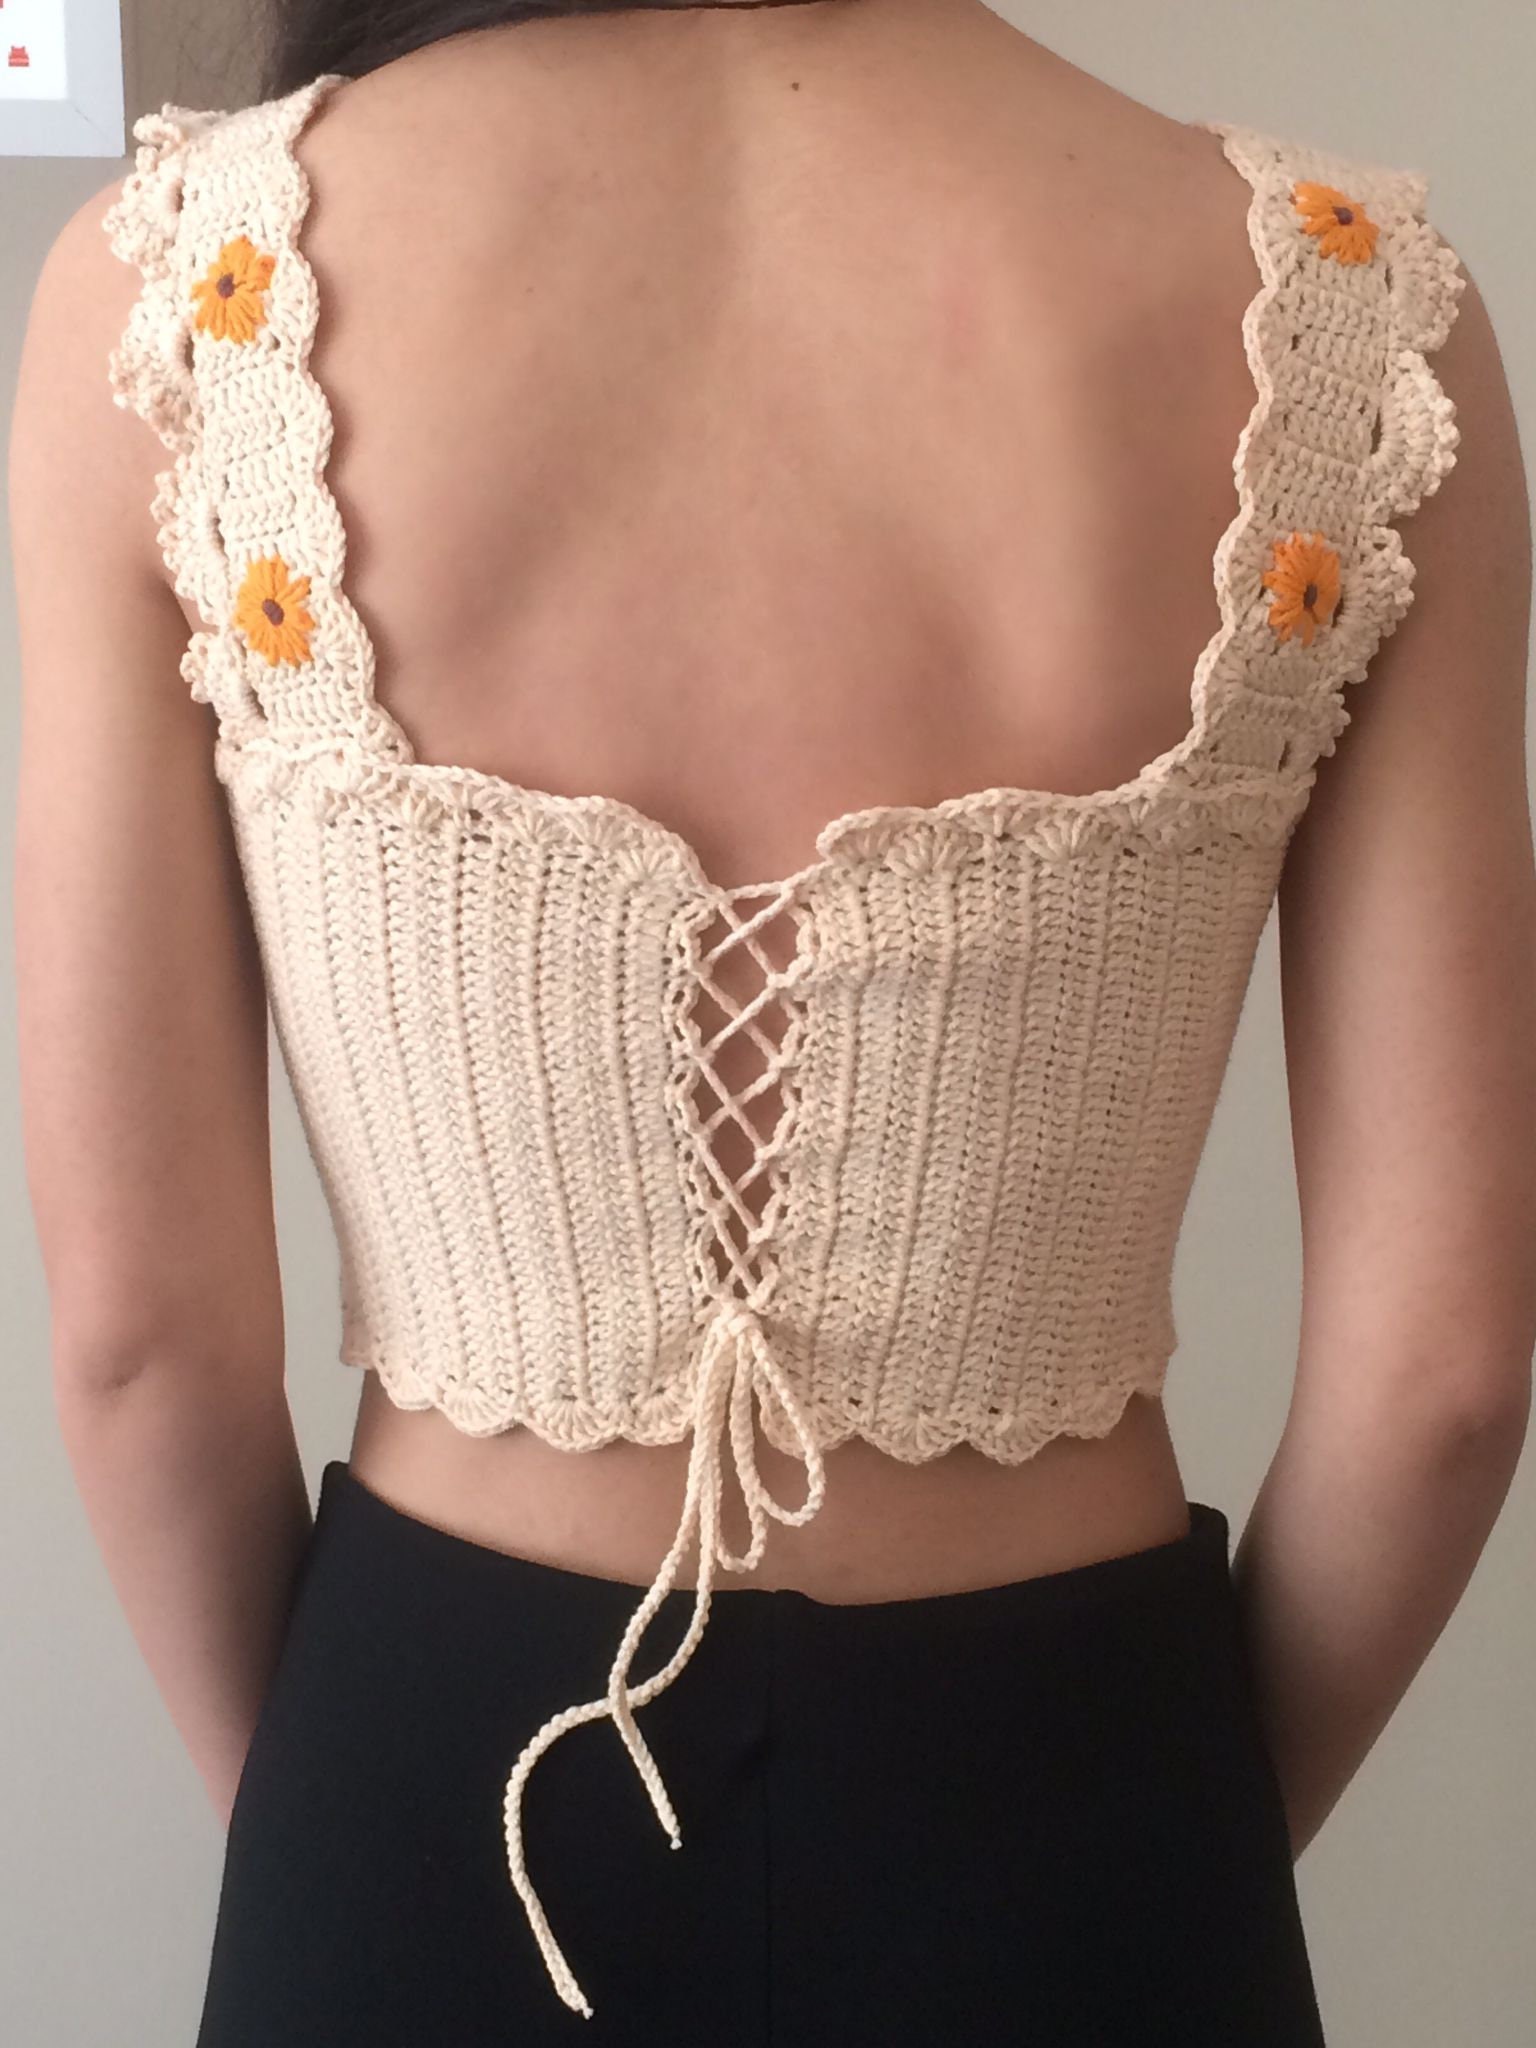 Women's Flower Embroidered Crochet Knitted Crop Top, Flower Crop Top, Crochet  Top, Summer Crop Top -  Canada